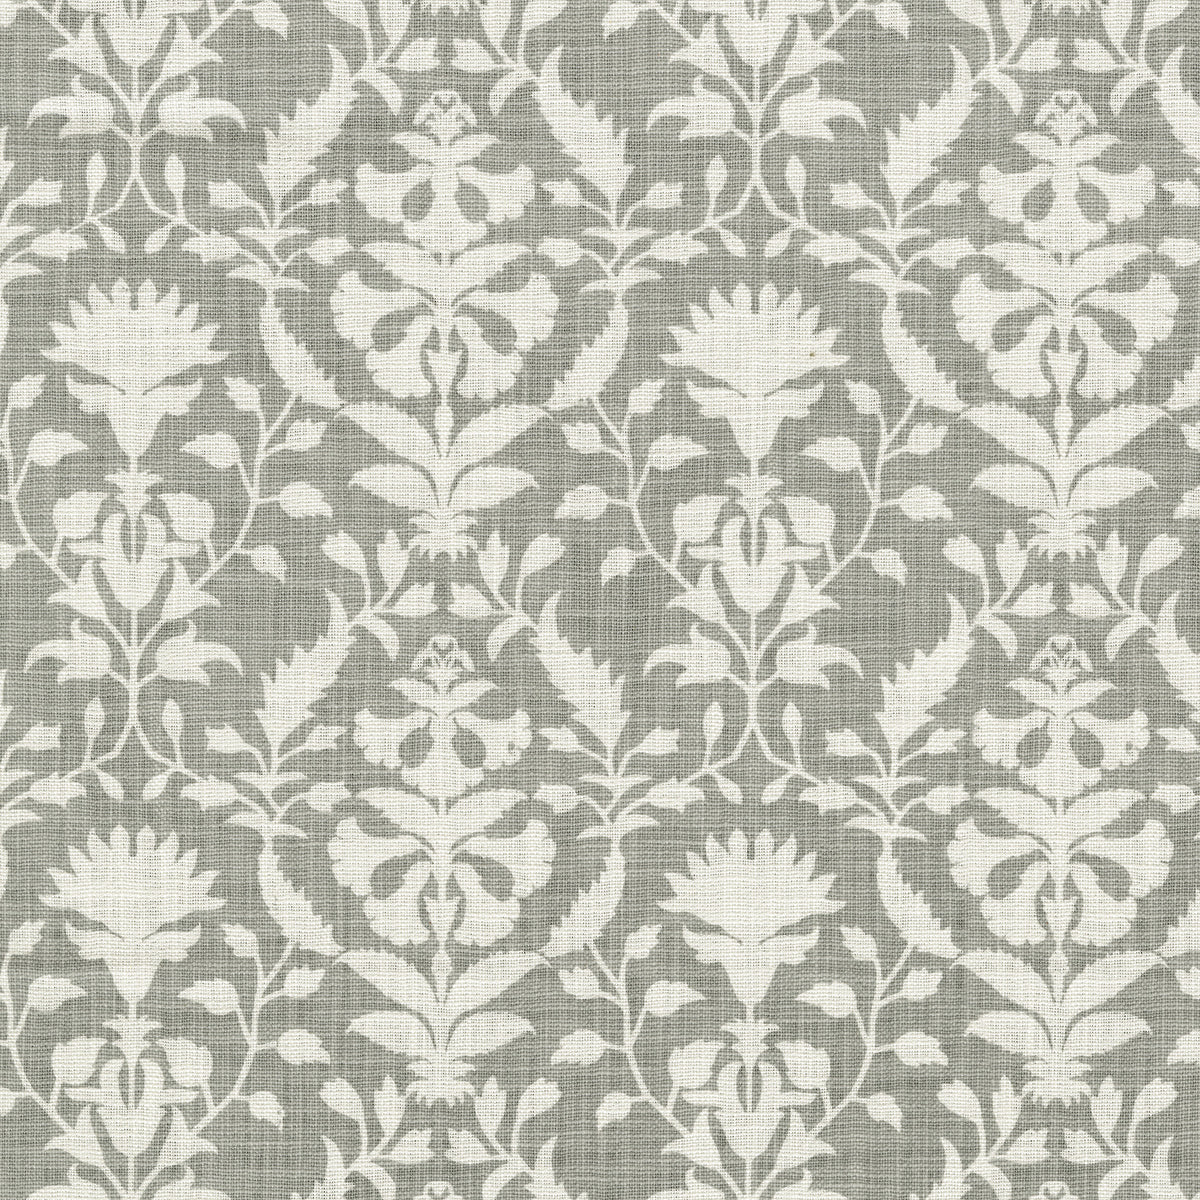 P/K Lifestyles Peacefulness - Sterling 411742 Upholstery Fabric